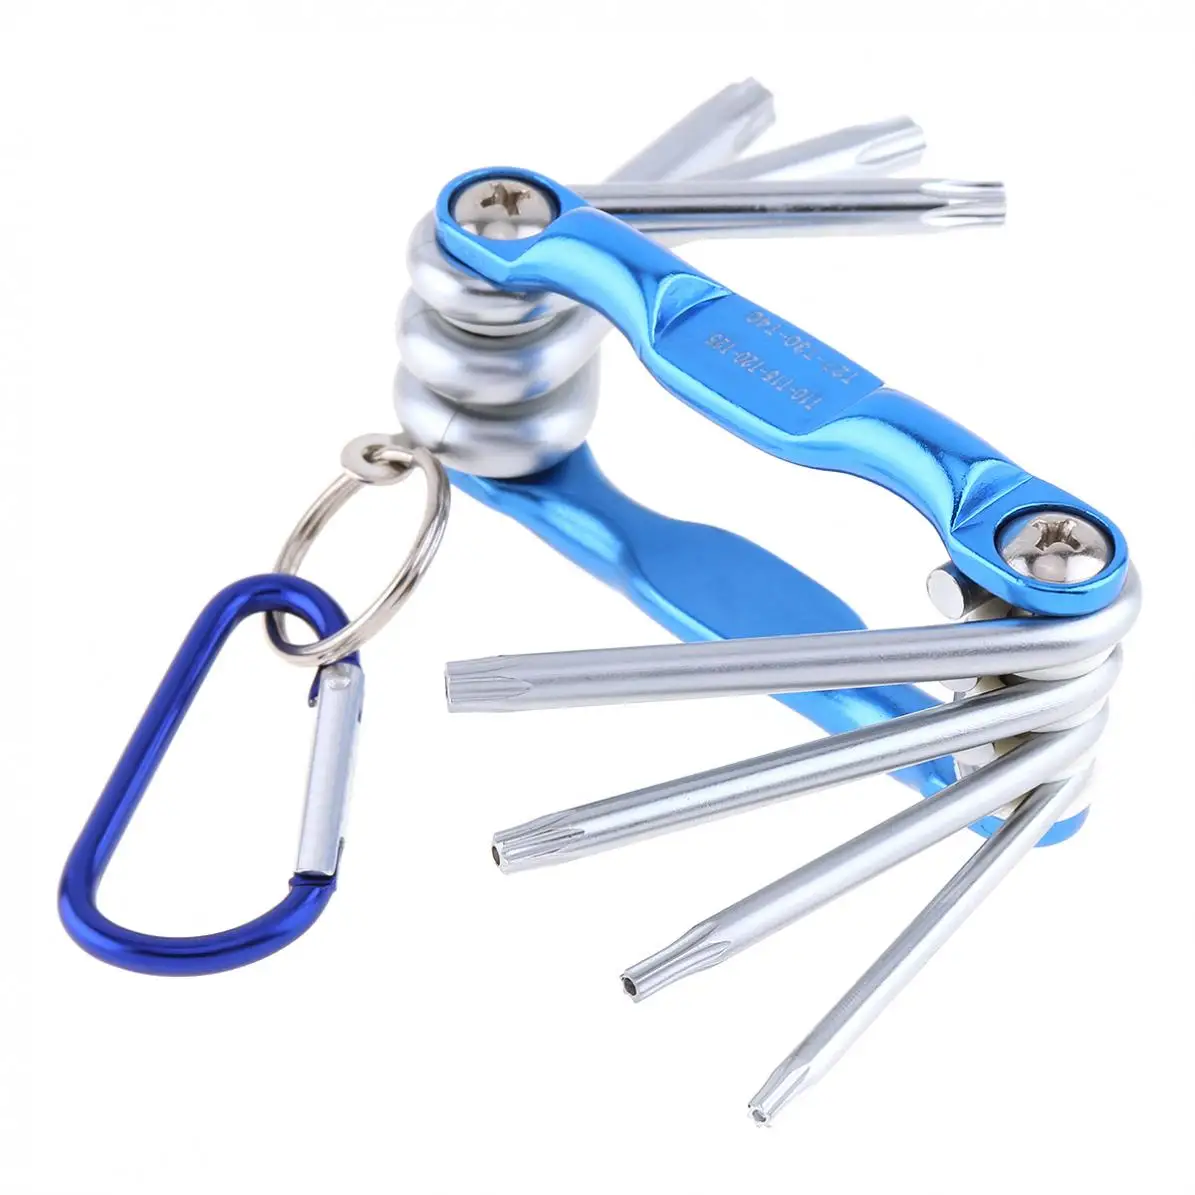 

7pcs/set Multifunctional Combination Chrome Vanadium Steel Folding Hex Wrench with Plum Head and Key Ring for Maintenance